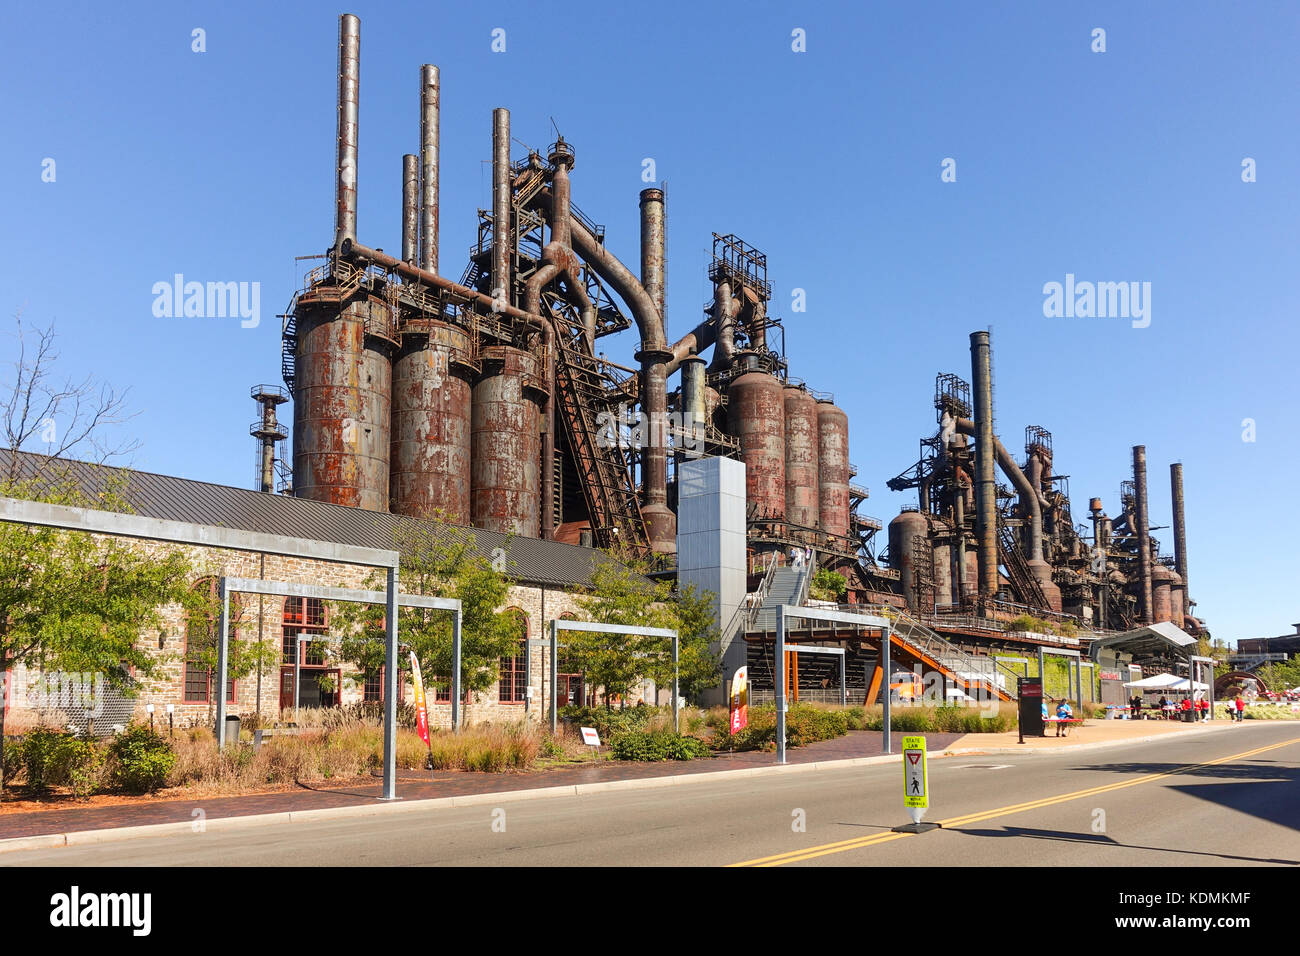 Bethlehem Steel Plant factory, Steelstacks, Pennsylvania,, Abandoned rusting remains of blast furnaces closed in 1995, now arts and events centre,USA. Stock Photo